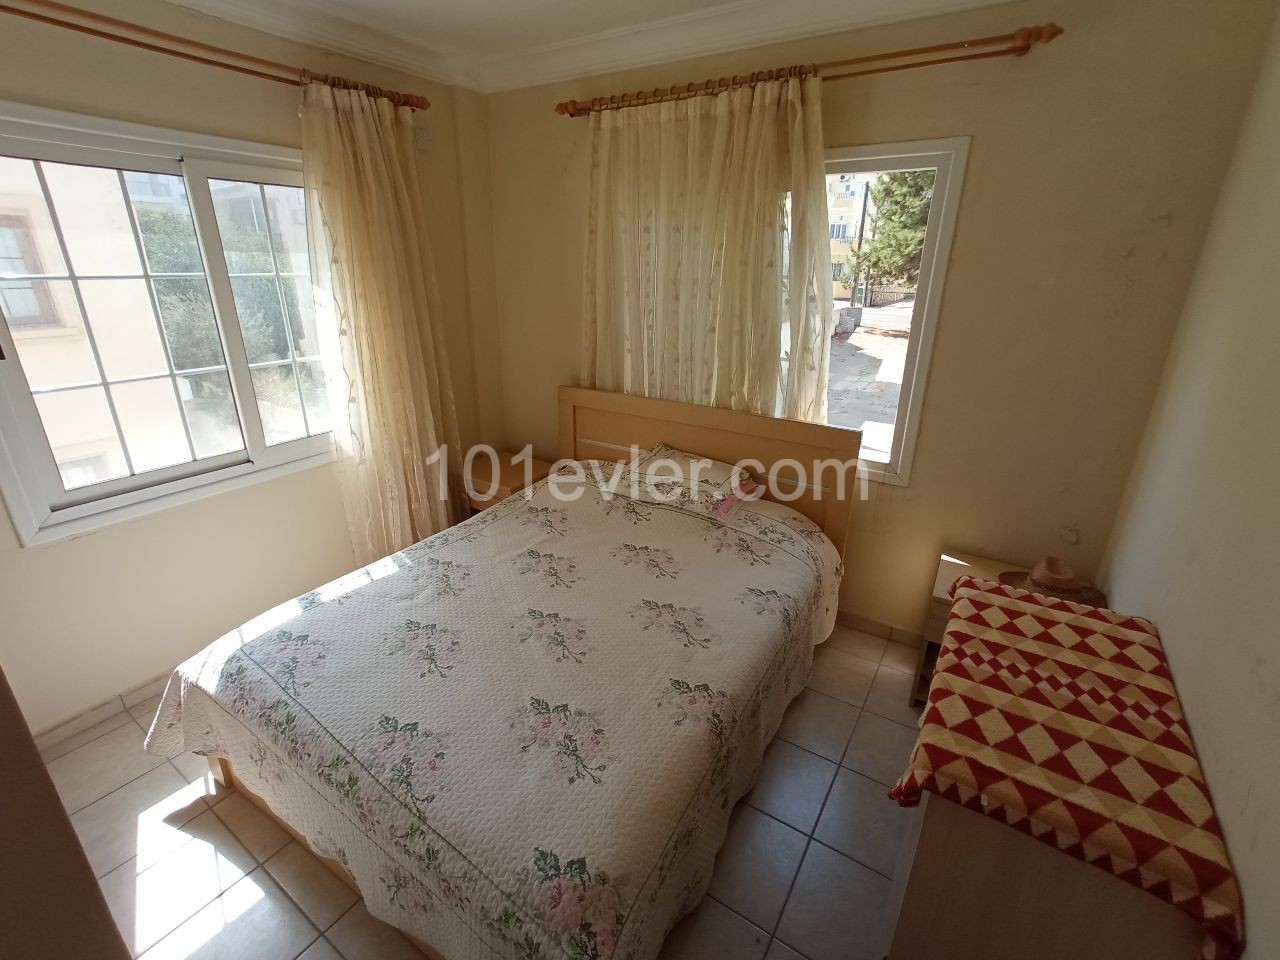 Great Investment Property - Large (140 Sq Mtrs) 3 Bedroom Apartment in the Heart of Kyrenia 